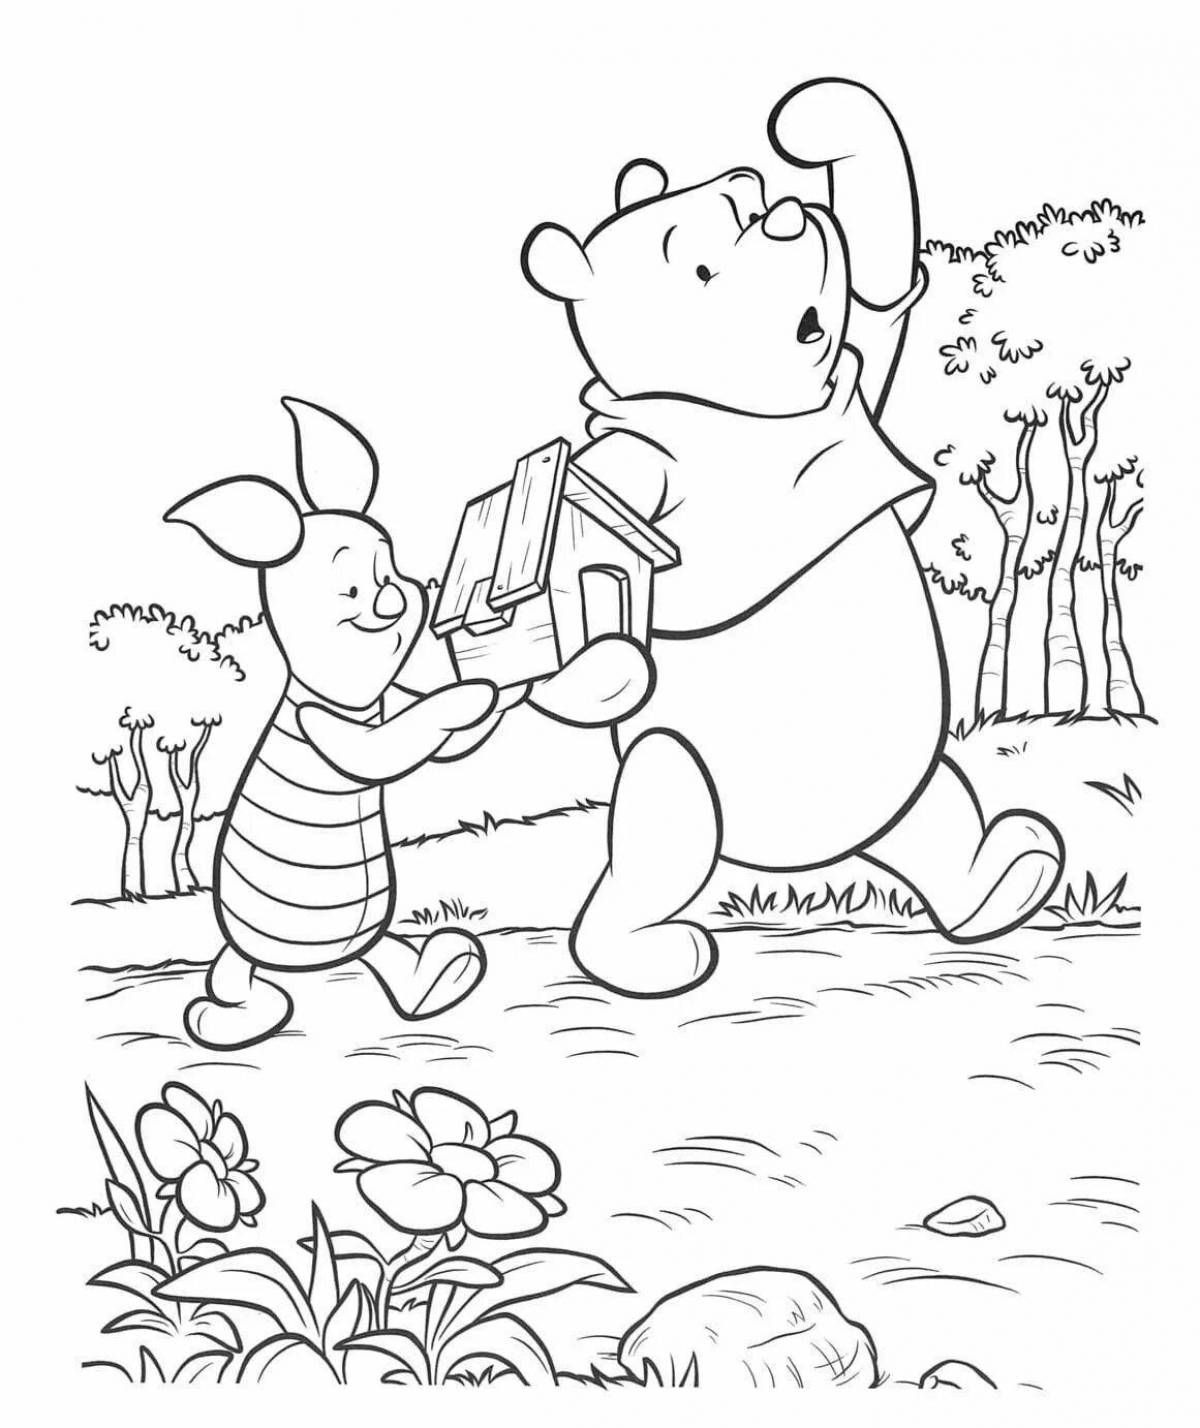 Winnie the pooh and his friends #6